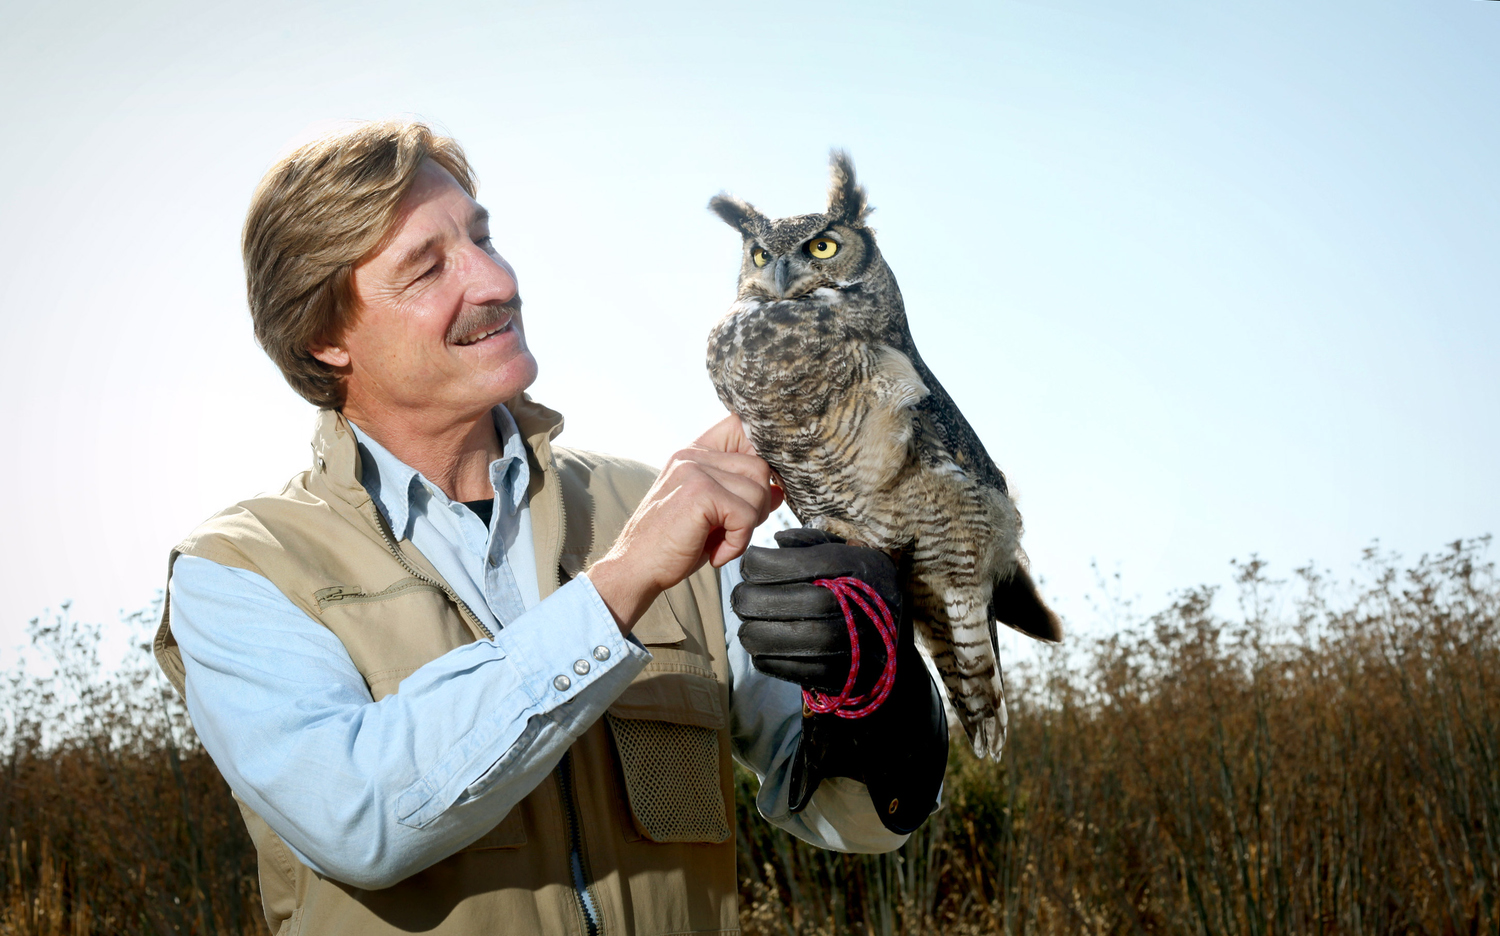  Peter Gros  Co-host, Mutual of Omaha's Wild Kingdom 